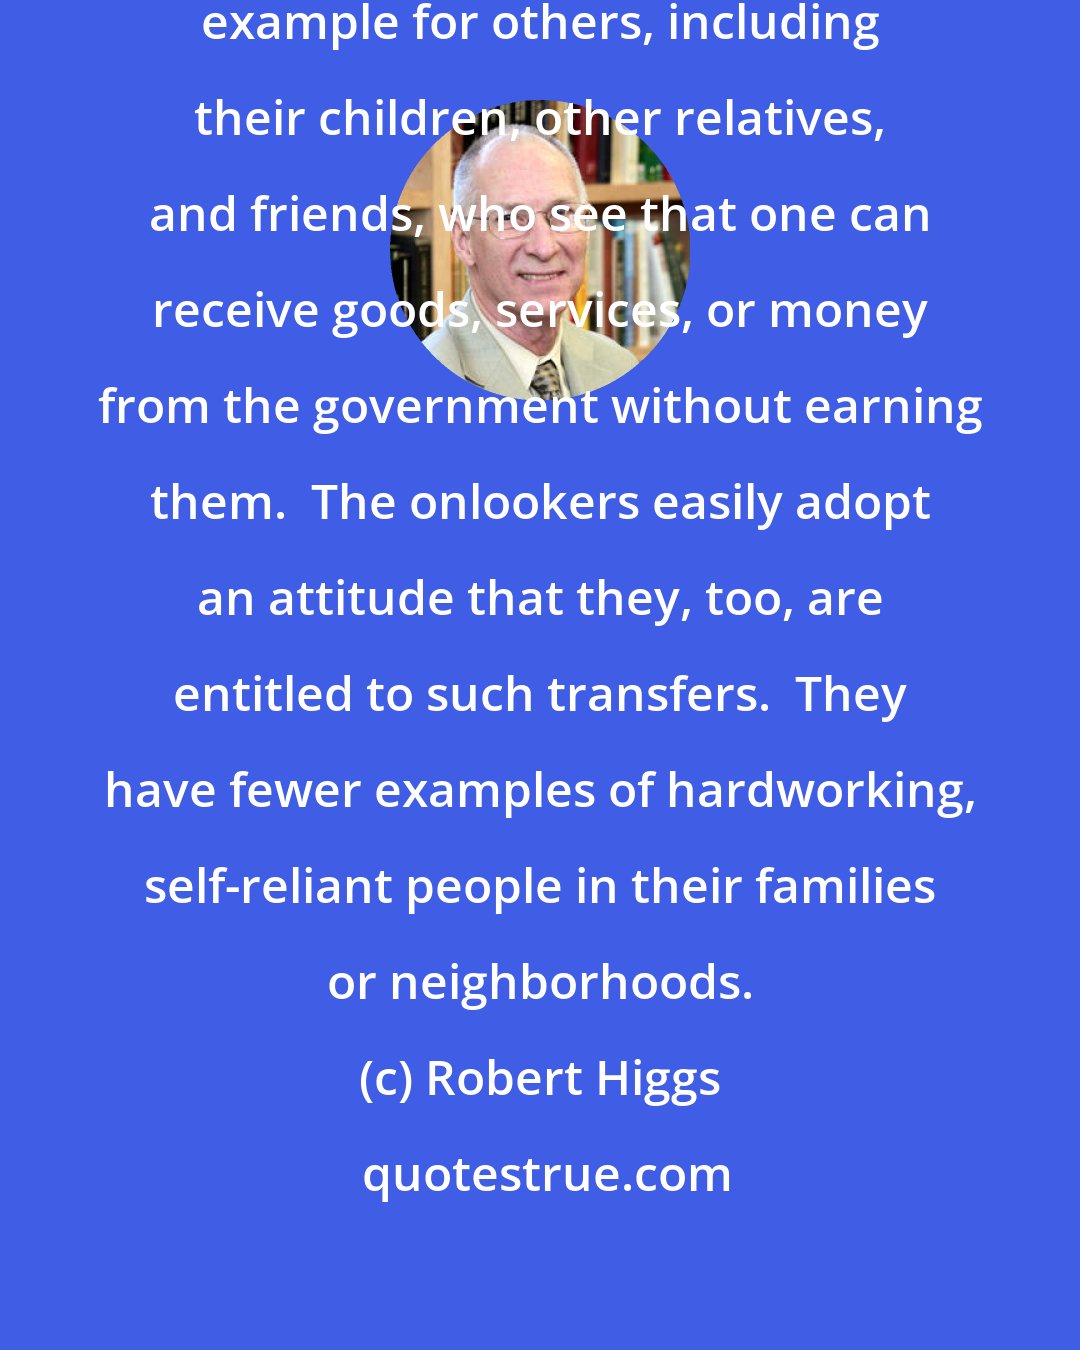 Robert Higgs: Recipients of transfers set a bad example for others, including their children, other relatives, and friends, who see that one can receive goods, services, or money from the government without earning them.  The onlookers easily adopt an attitude that they, too, are entitled to such transfers.  They have fewer examples of hardworking, self-reliant people in their families or neighborhoods.